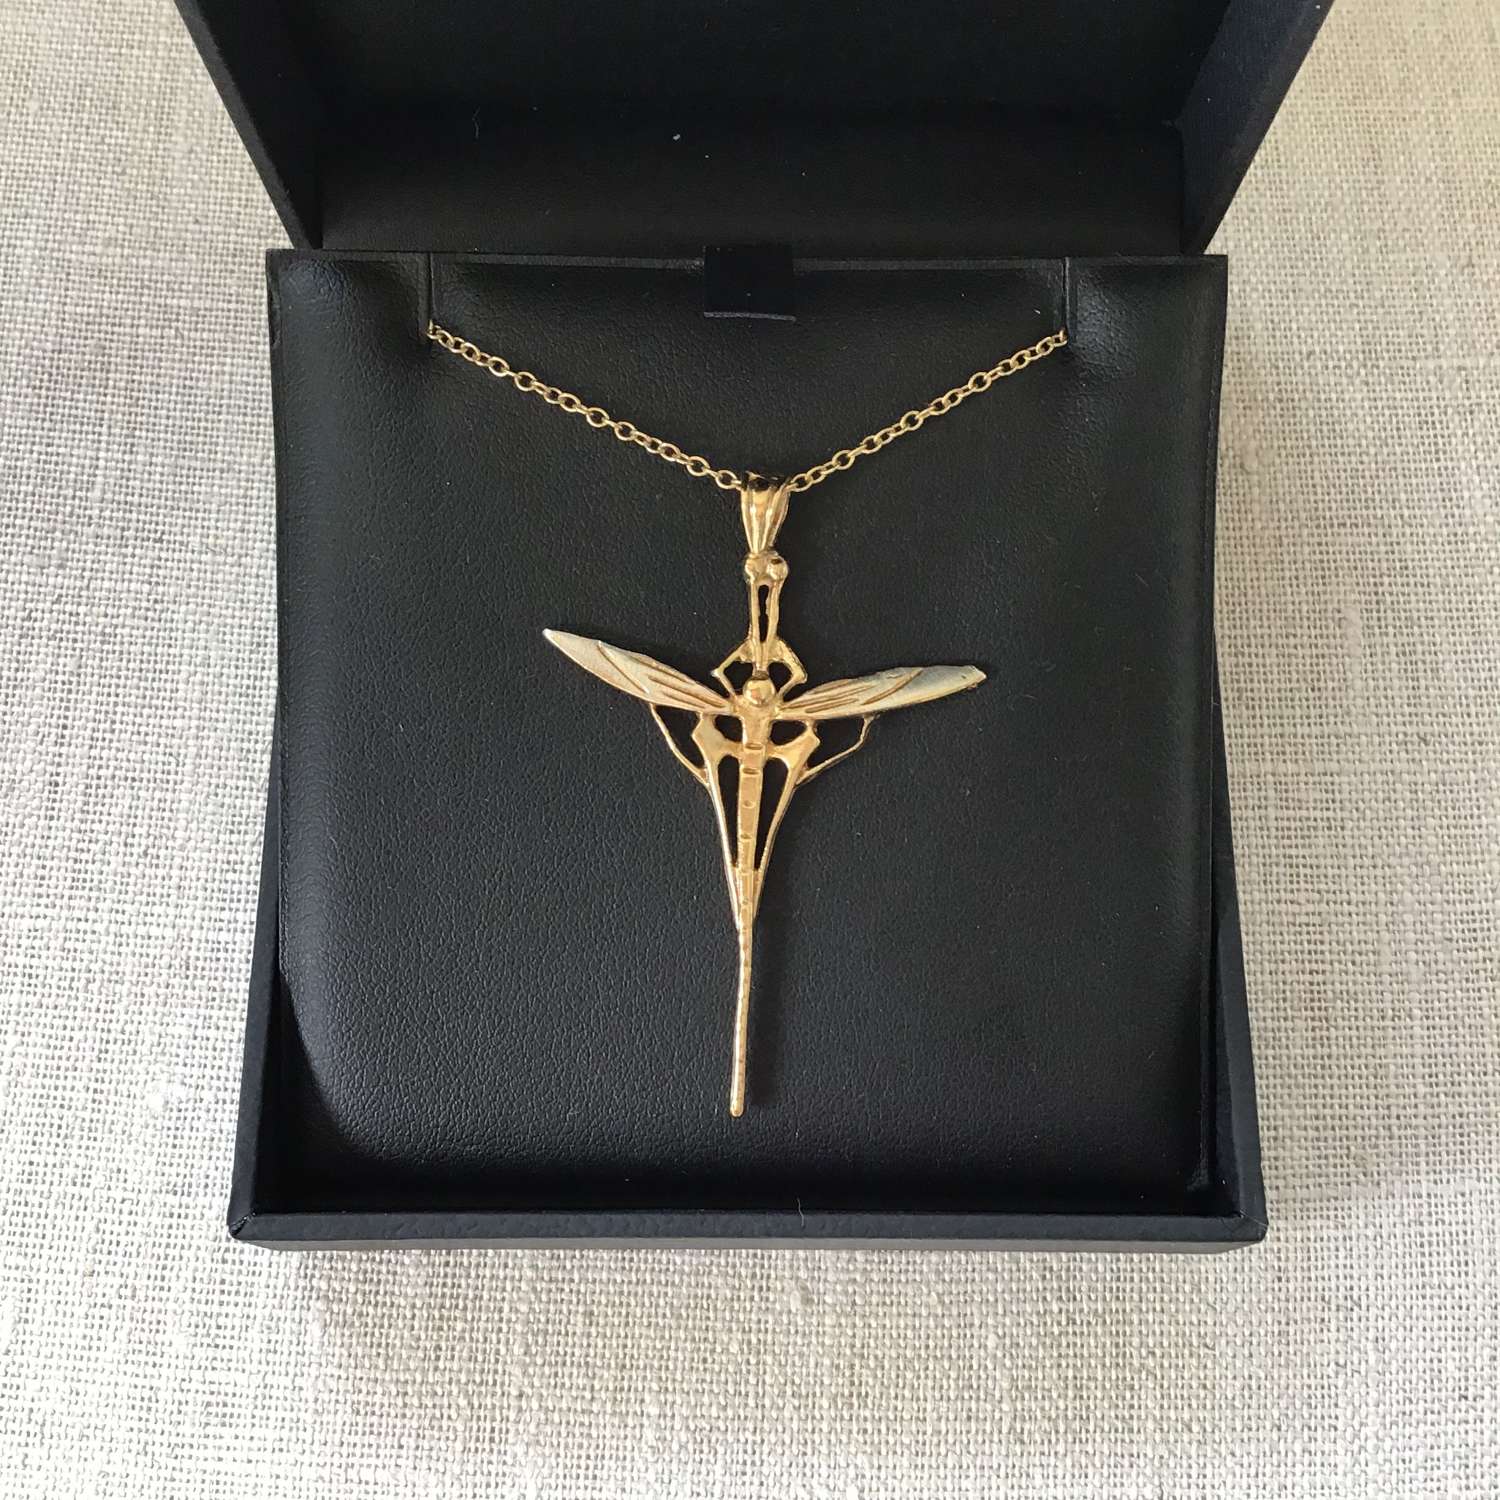 An 18ct gold and  silver dragonfly pendant necklace by Simon Kemp